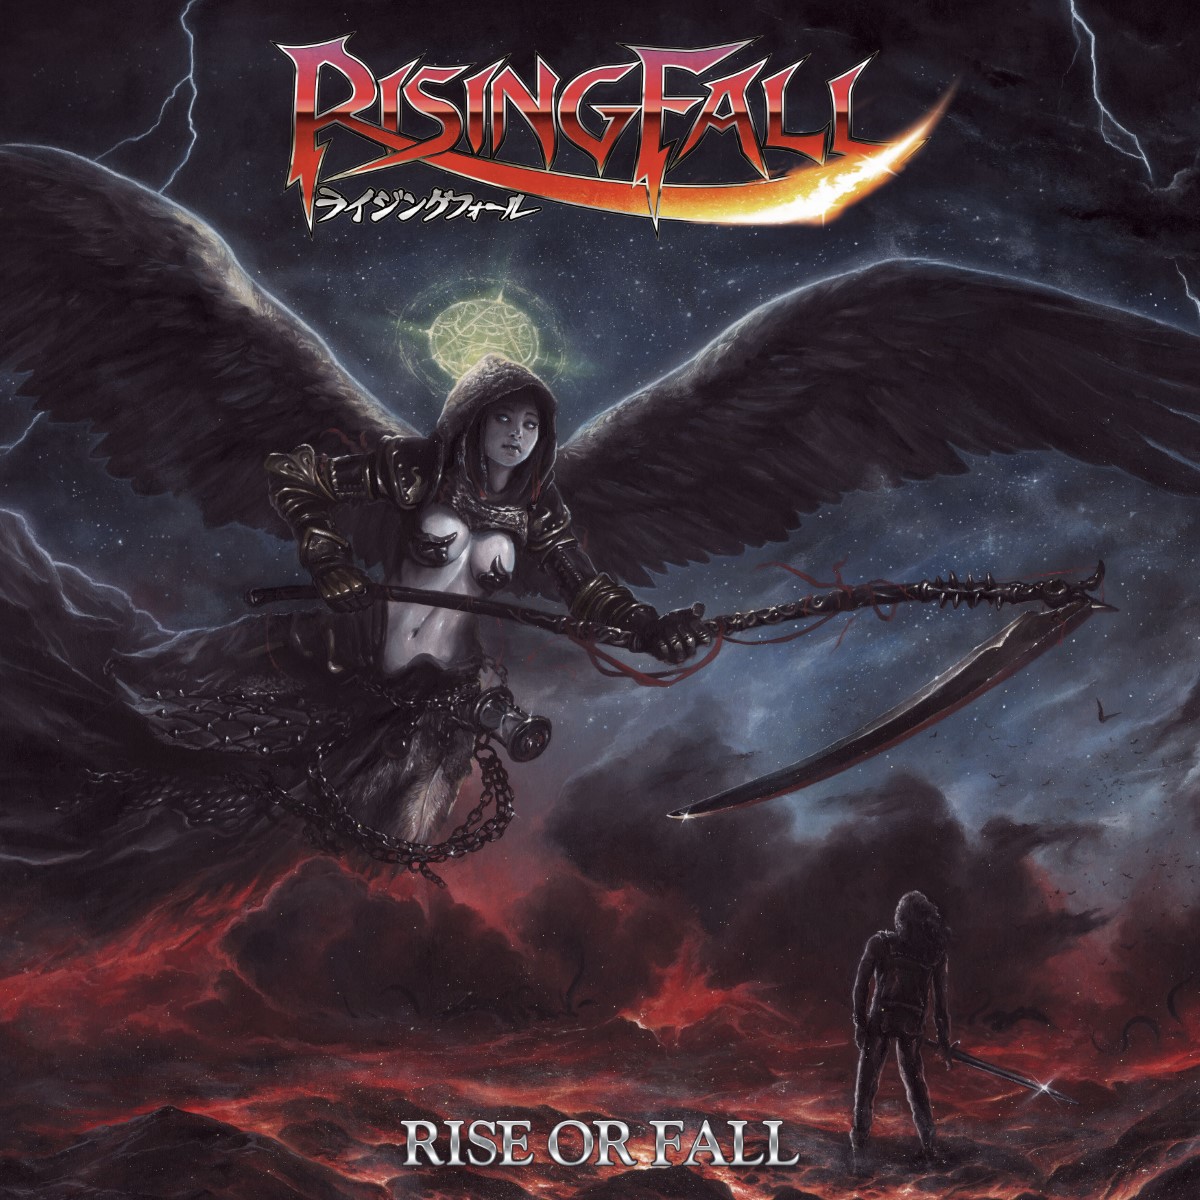 Listen To Japanese Metal Band Risingfall's New Song "Masters Of Metal"